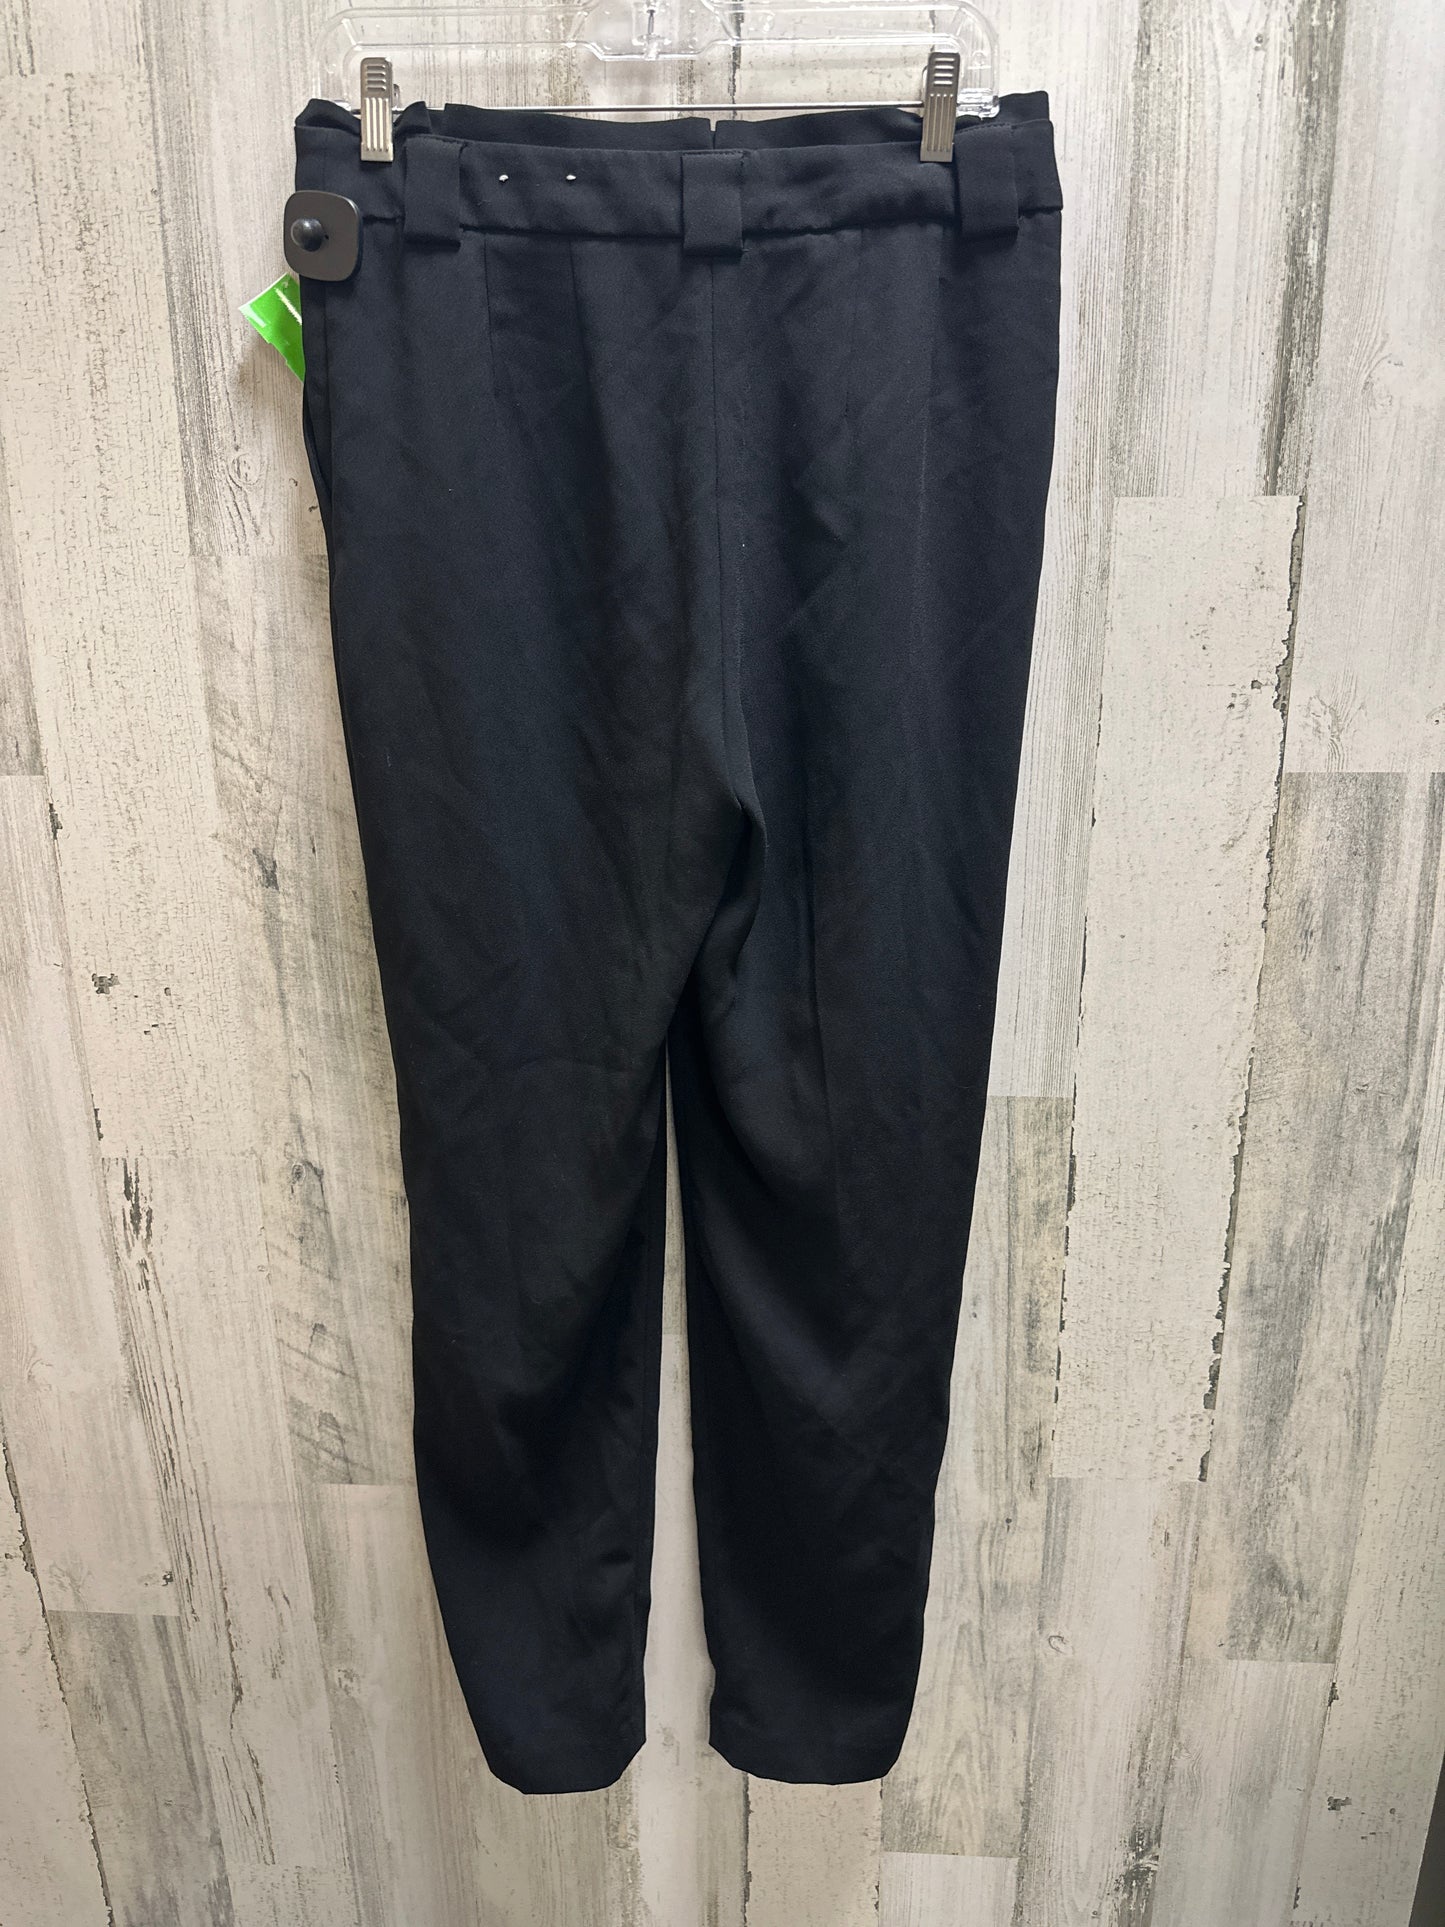 Pants Ankle By Express  Size: 8